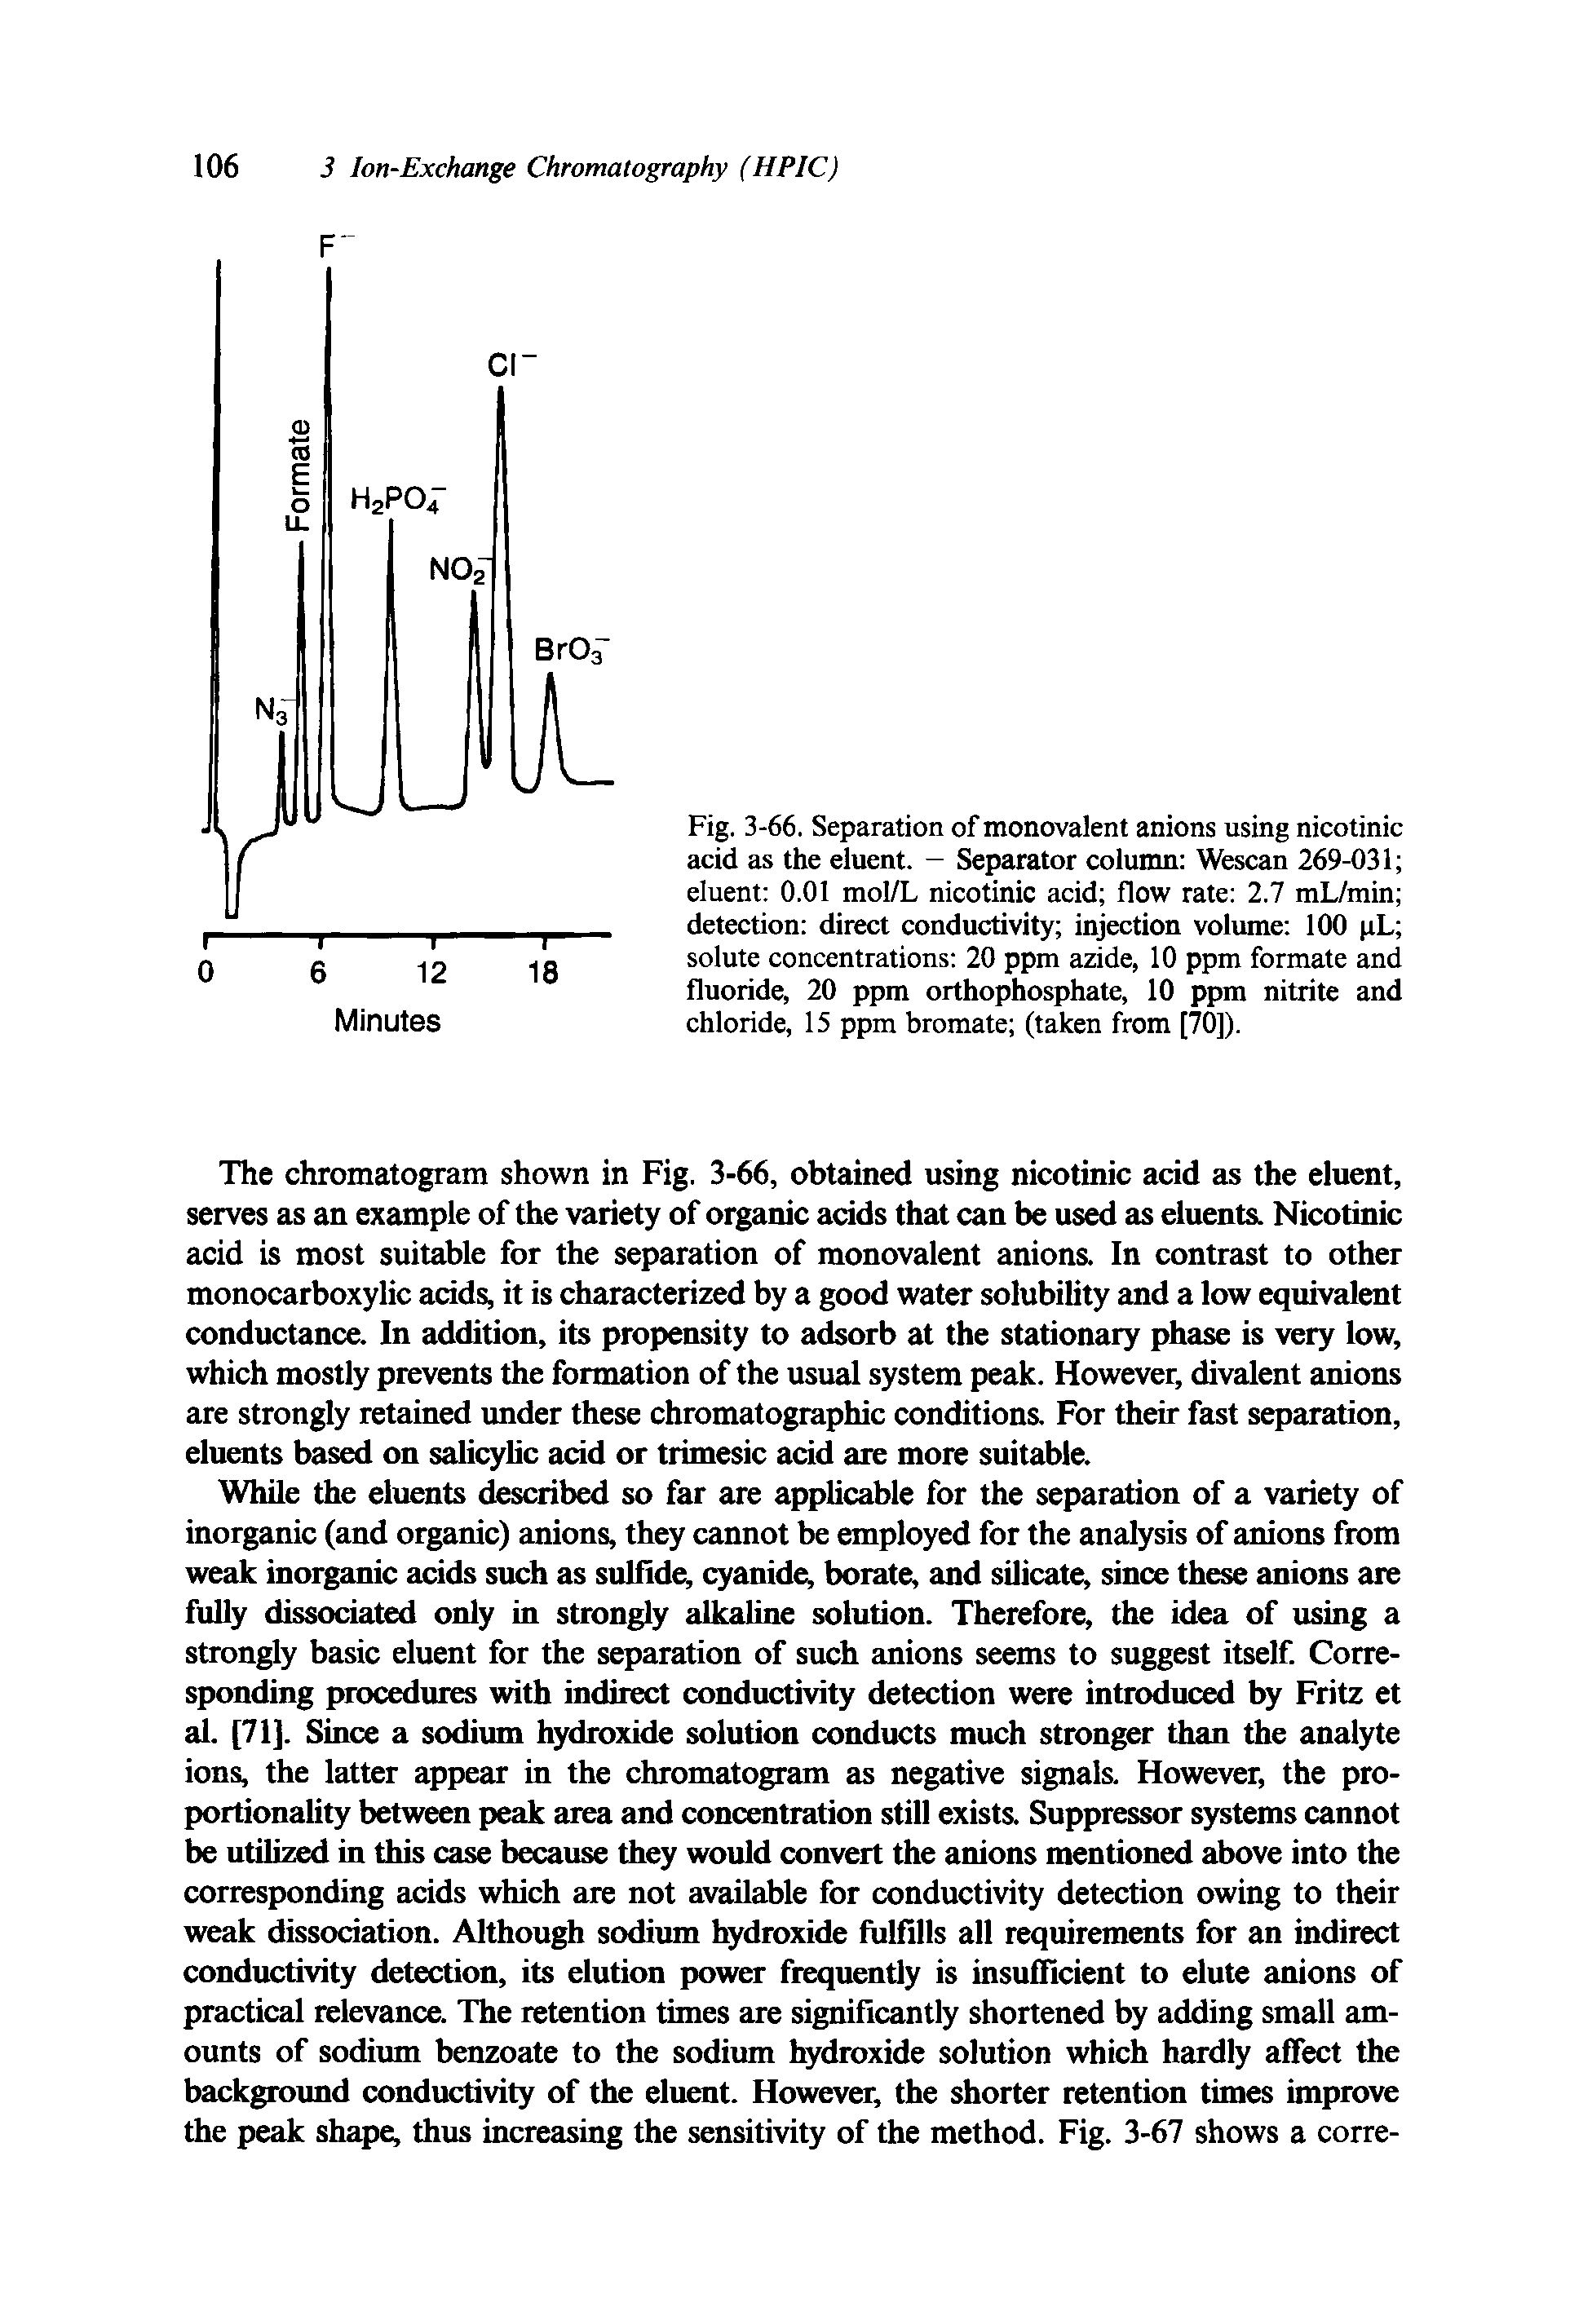 Fig. 3-66. Separation of monovalent anions using nicotinic acid as the eluent. — Separator column Wescan 269-031 eluent 0.01 moI/L nicotinic acid flow rate 2.7 mL/min detection direct conductivity injection volume 100 pL solute concentrations 20 ppm azide, 10 ppm formate and fluoride, 20 ppm orthophosphate, 10 ppm nitrite and chloride, 15 ppm bromate (taken from [70]).